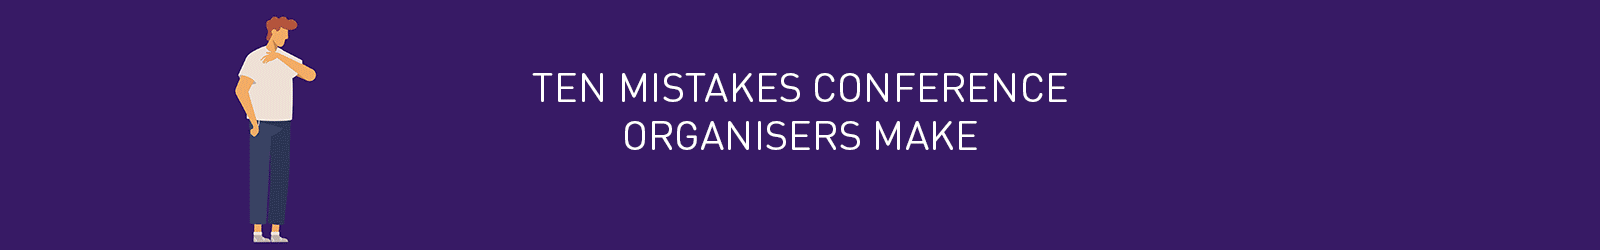 
Ten Mistakes Conference Organisers Make
